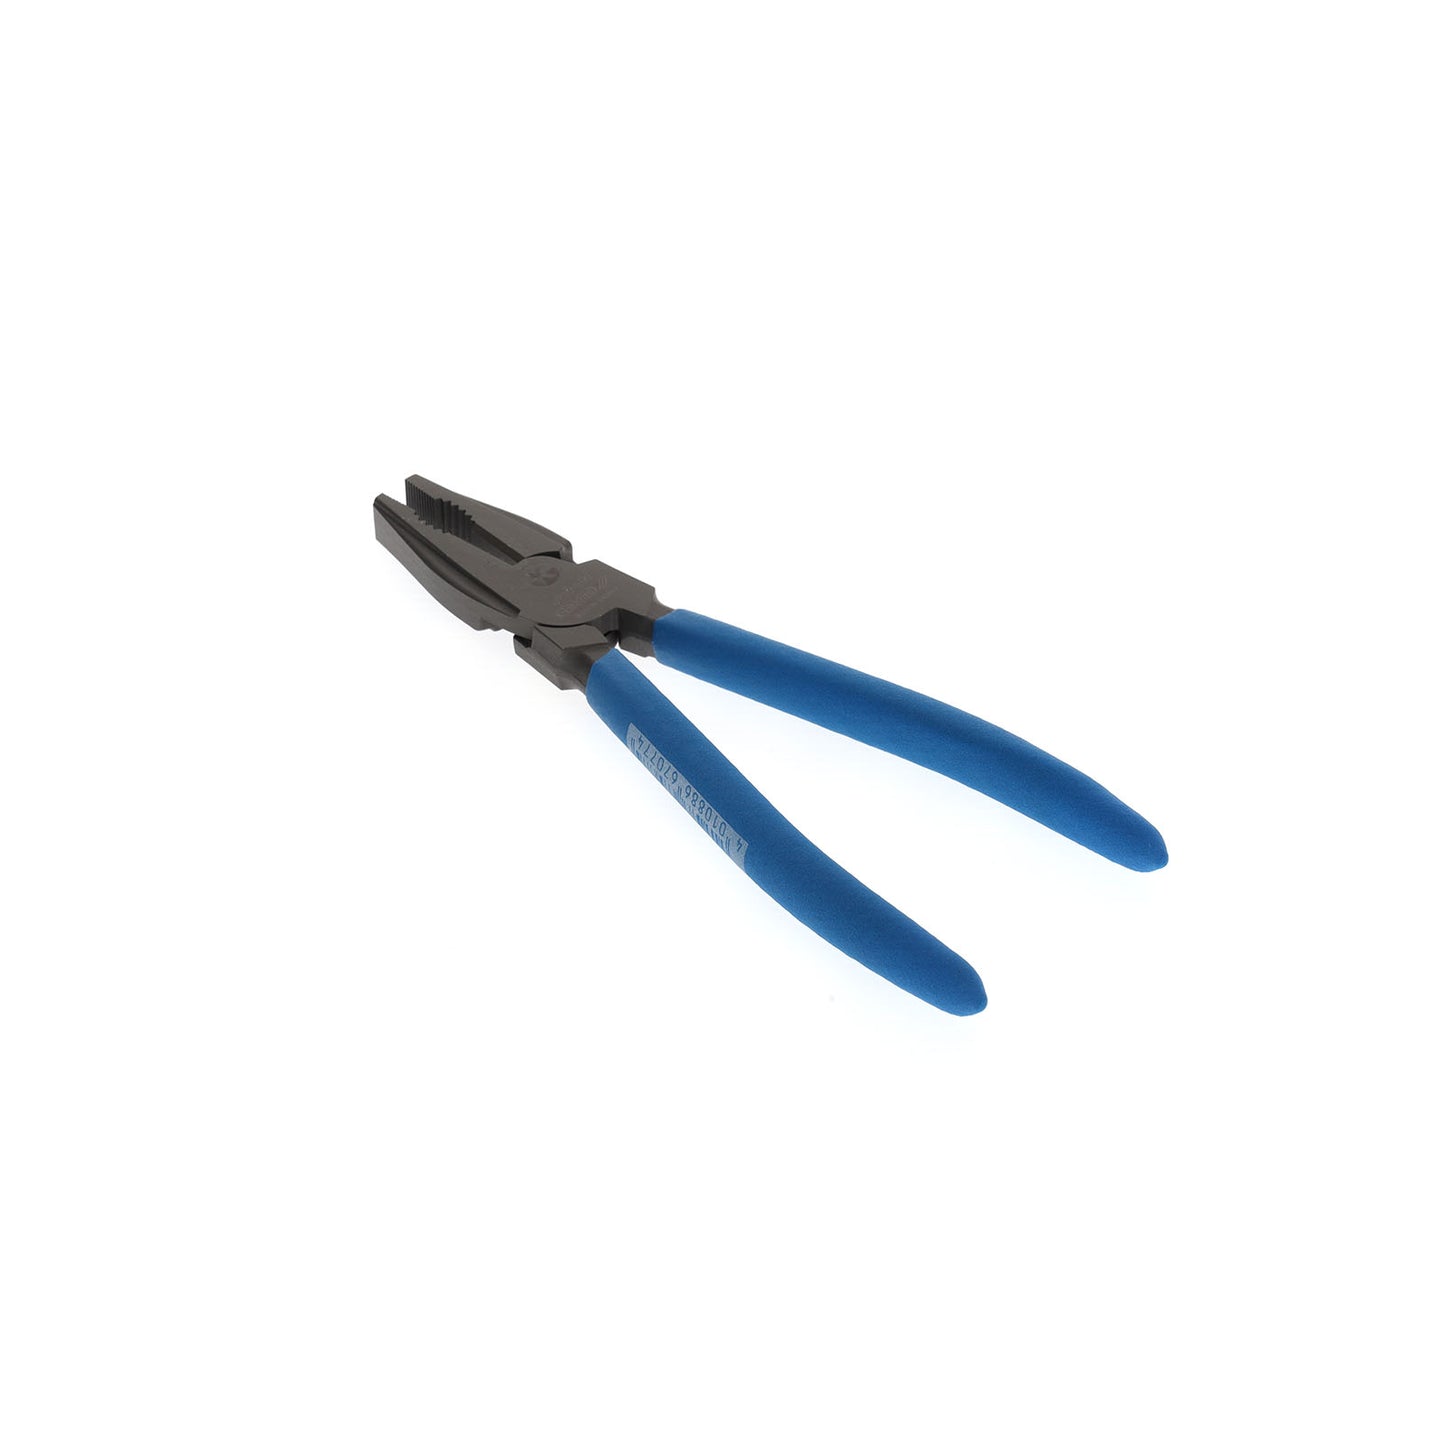 GEDORE 8250-200 TL - Universal force pliers 200 mm (6707740)